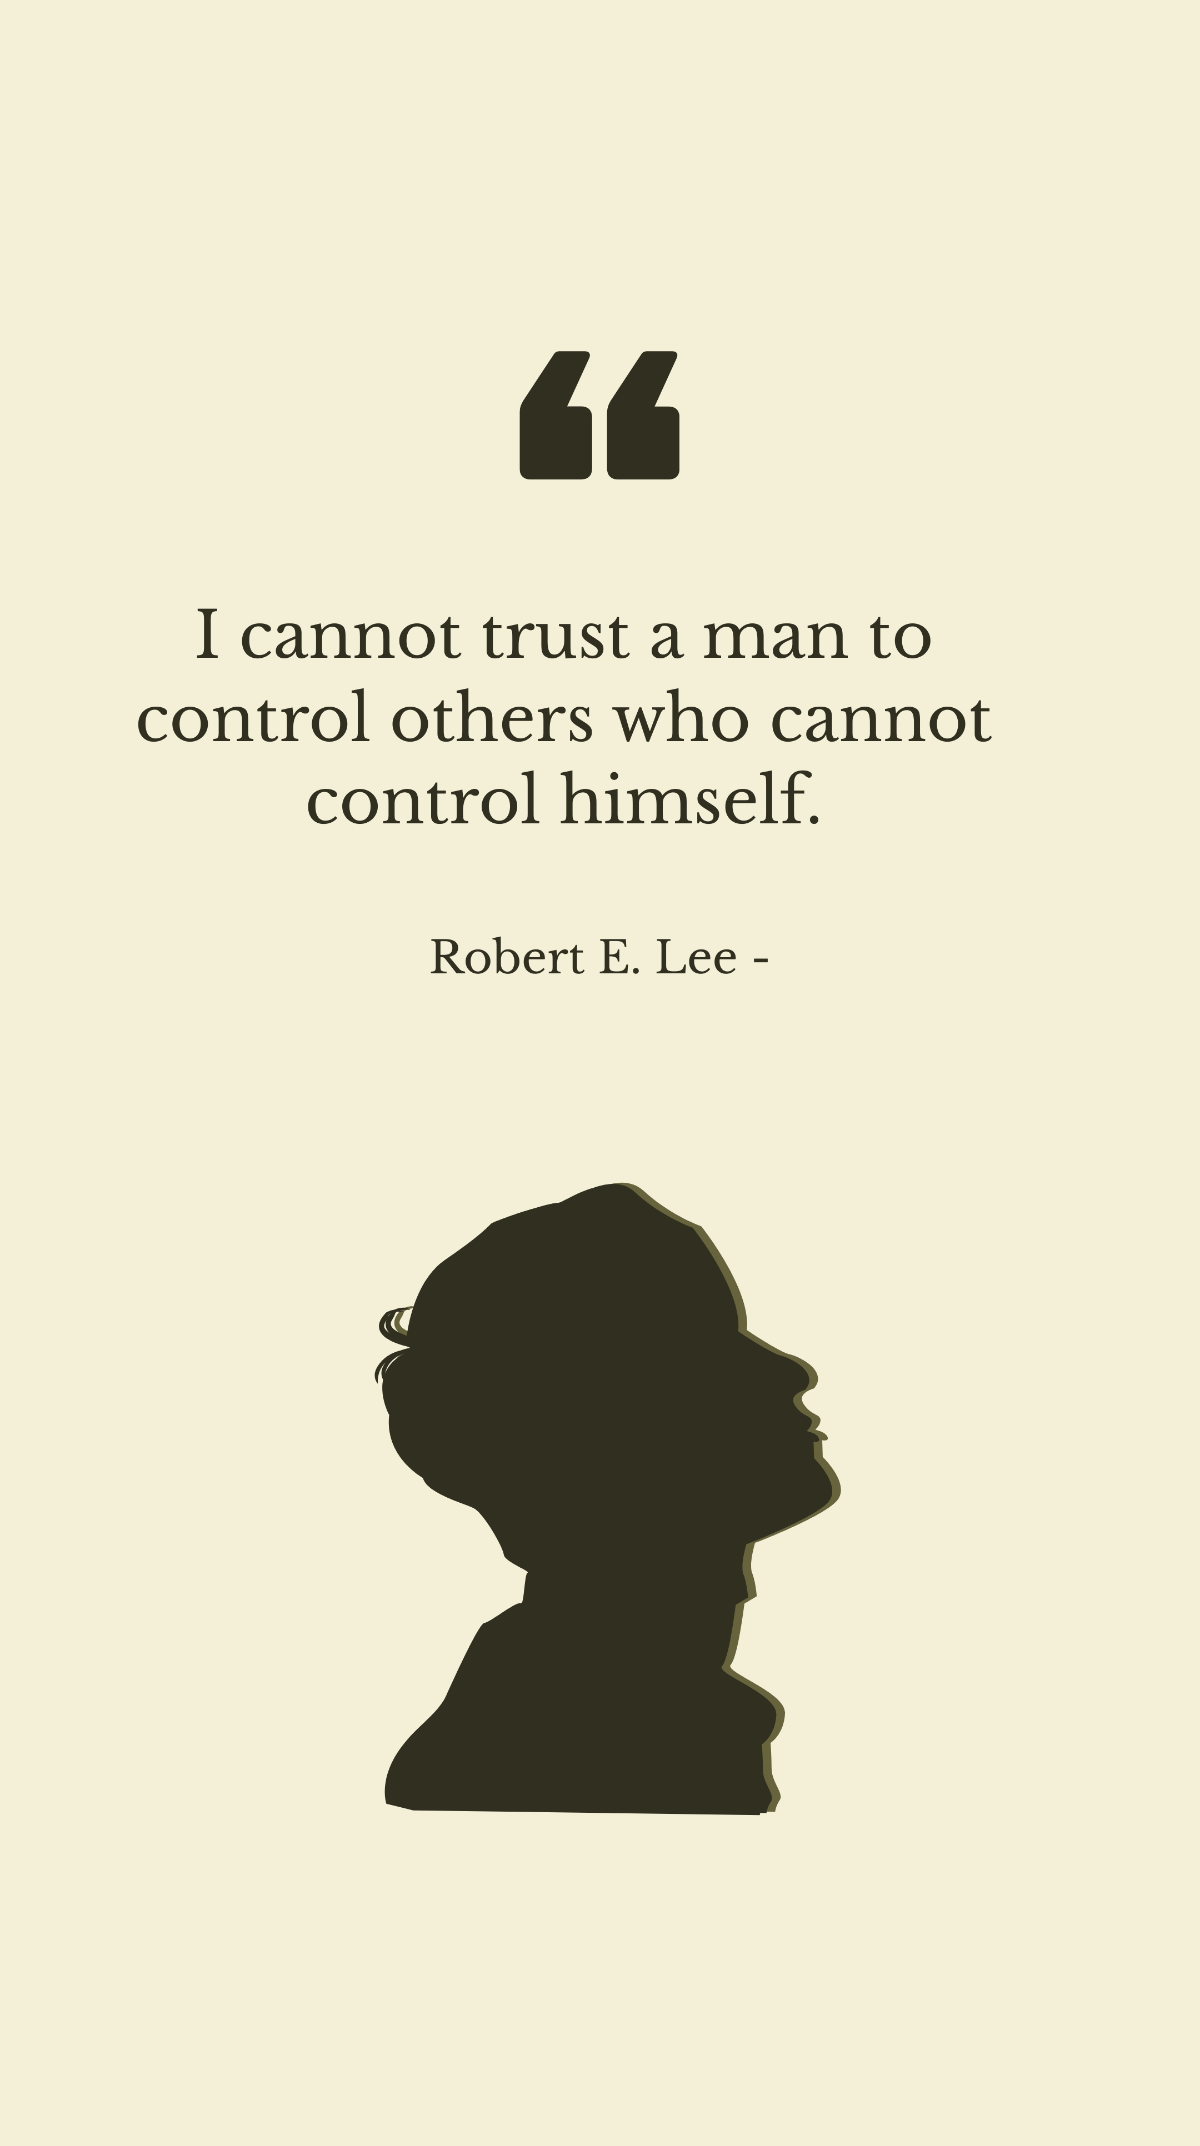 Robert E. Lee - I cannot trust a man to control others who cannot control himself.